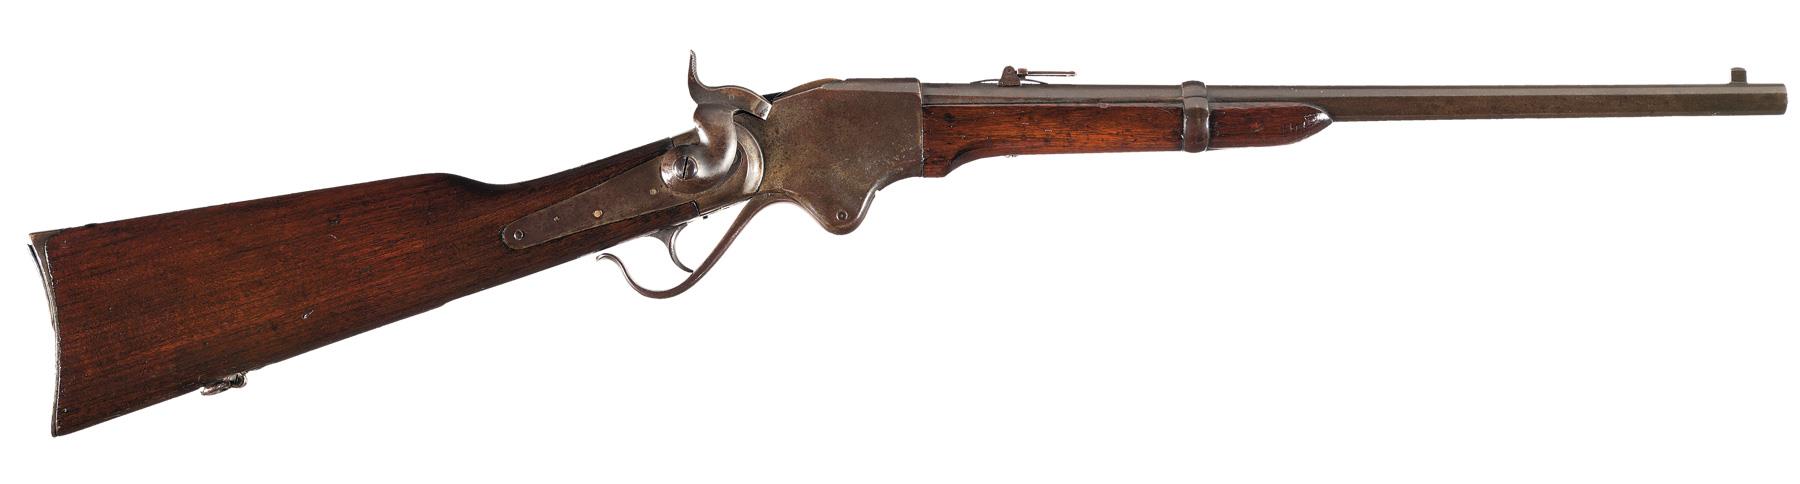 spencer repeating rifle serial numbers